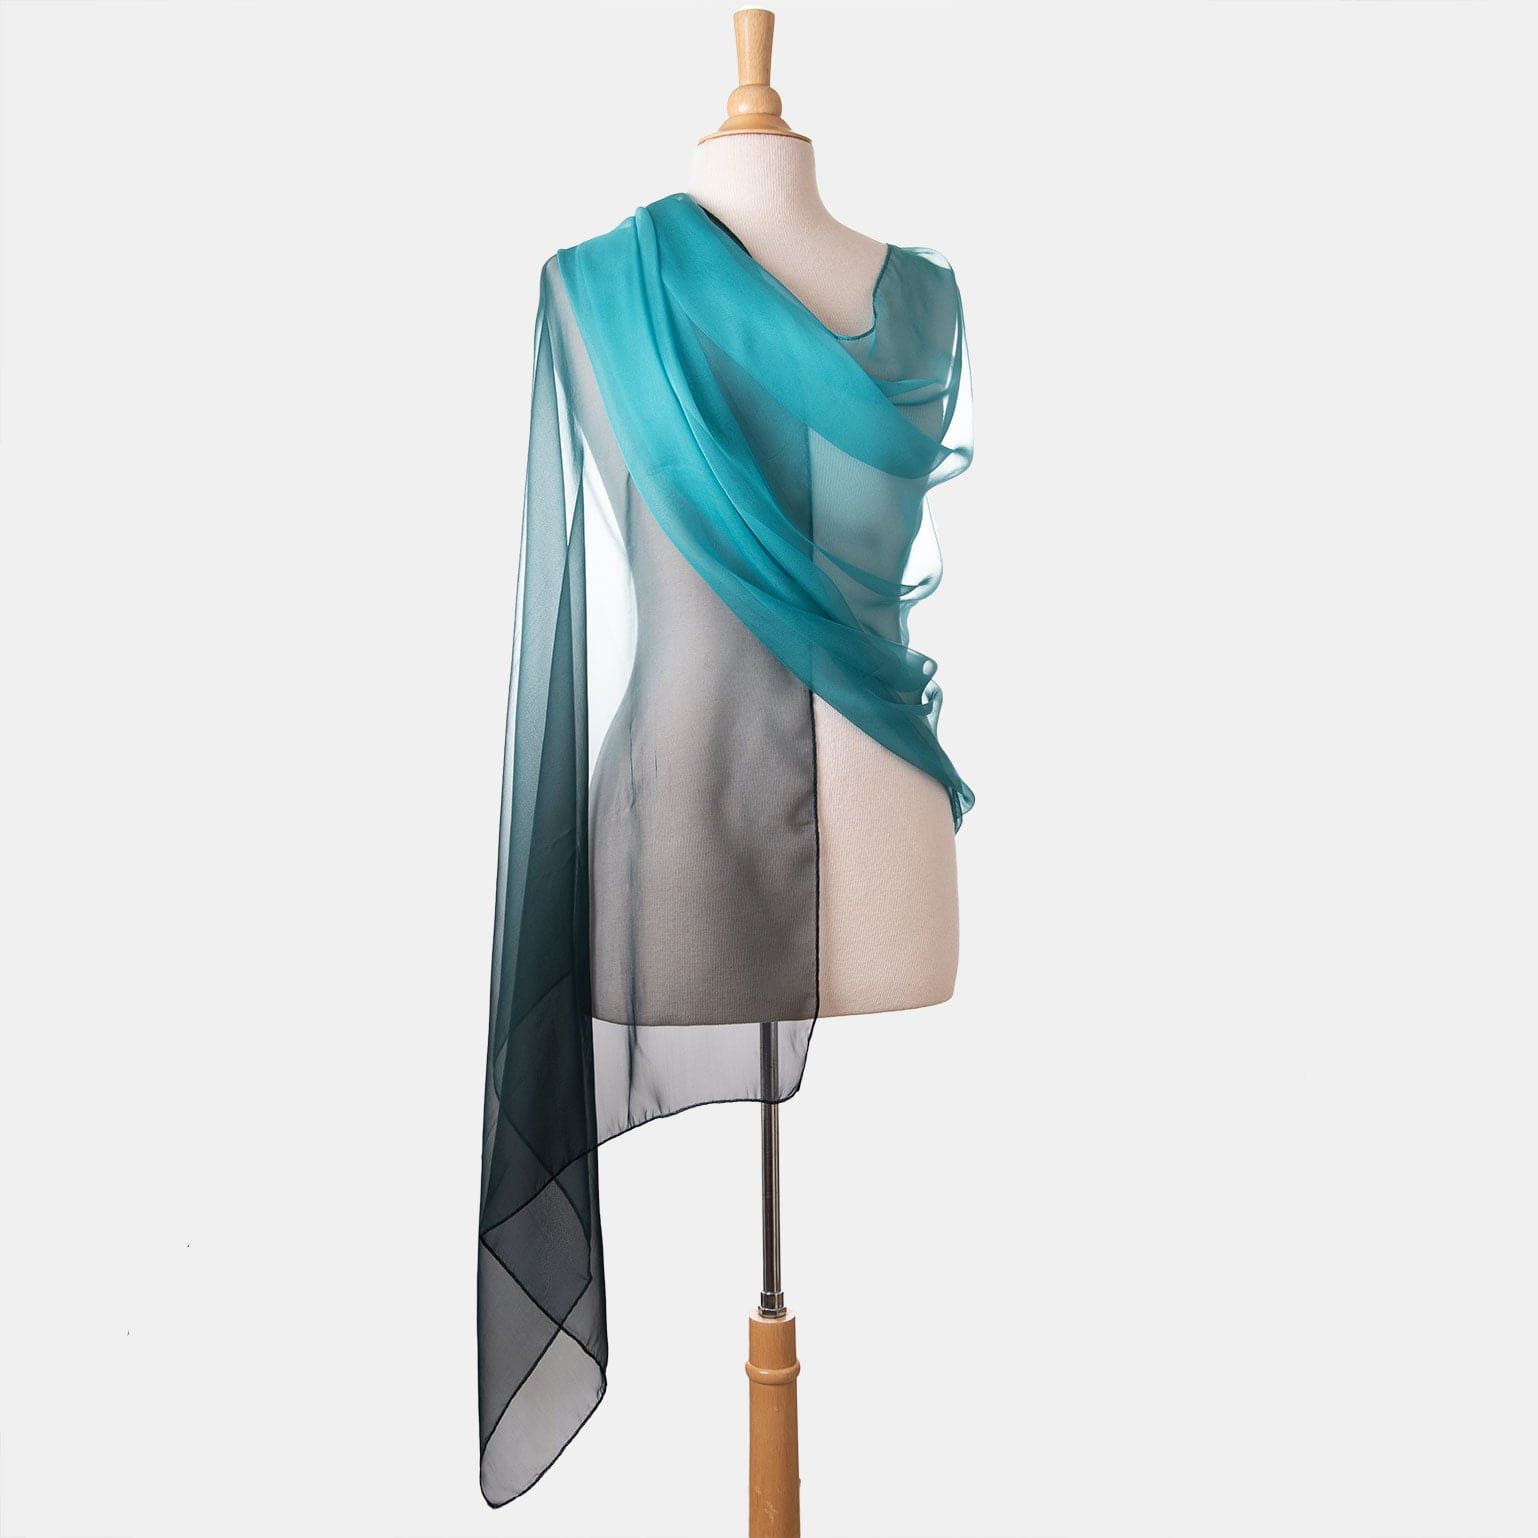 Light Grey Colour Cashmere and Silk Scarf Shawl in Large Size, Cashmere  Silk Wrap Shawl Scarves, Wholesale Cashmere and Silk Wrap Scarf Shawl